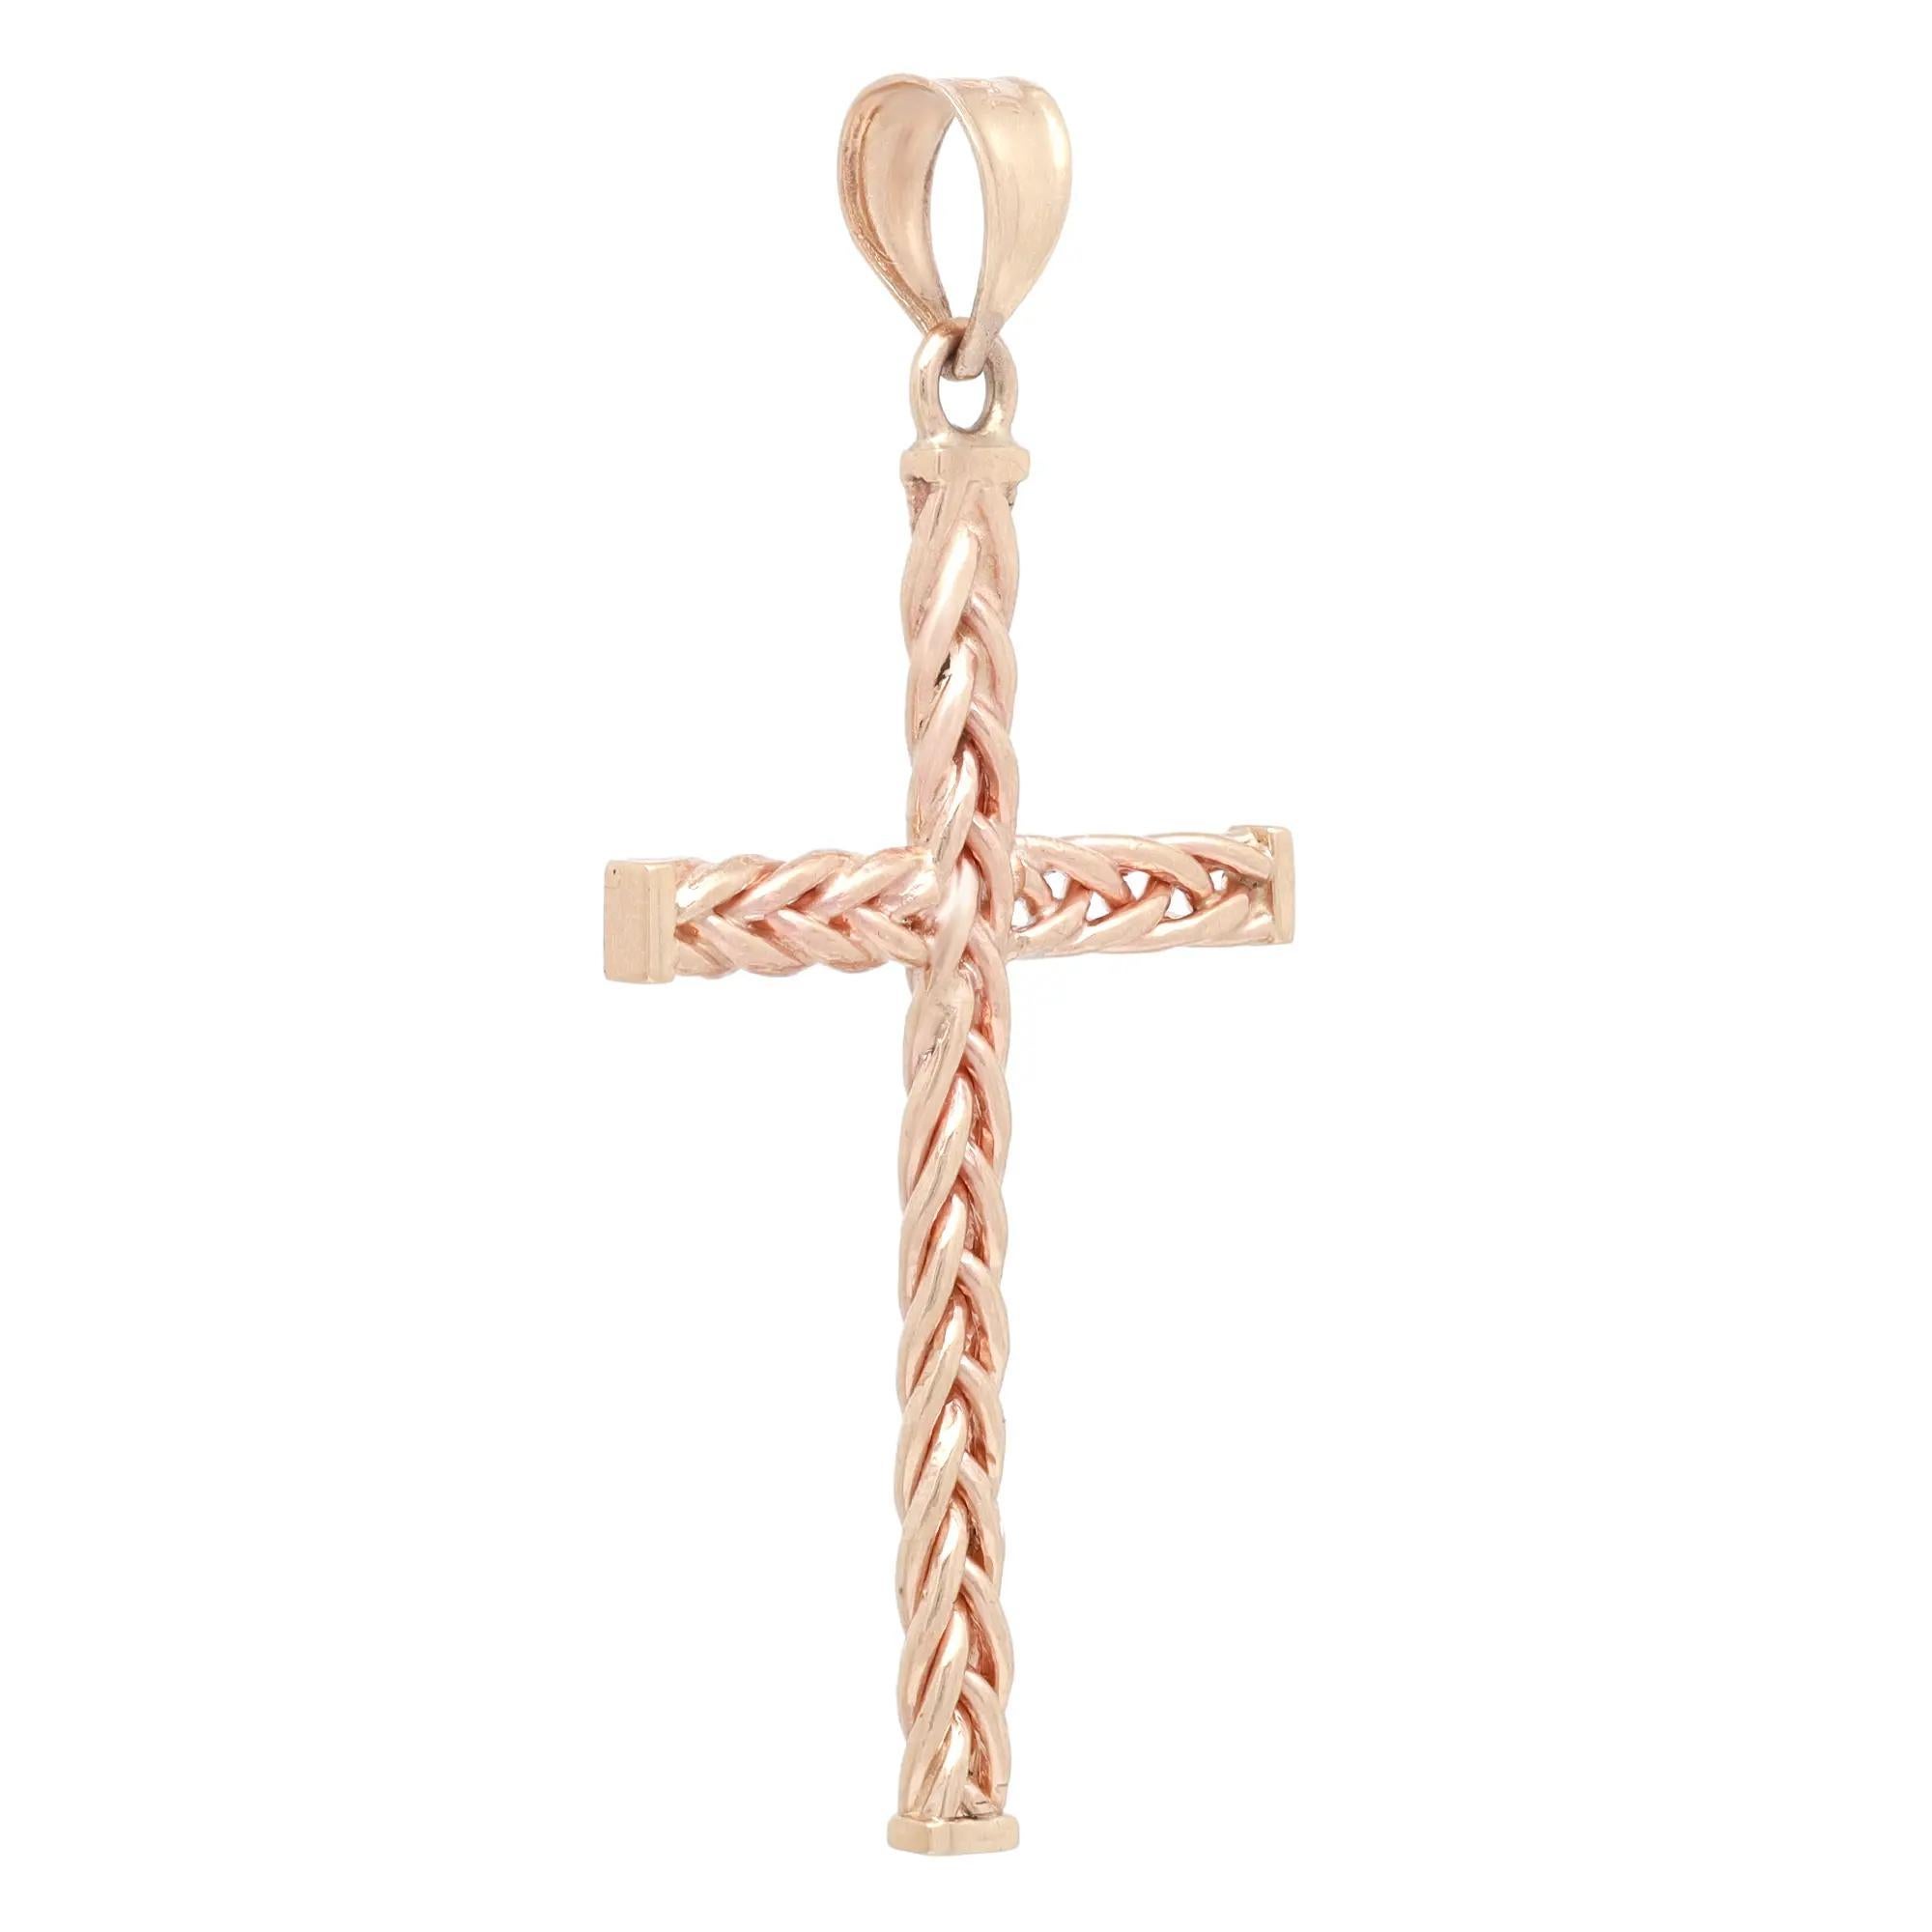 This meaningful cross pendant shines in lustrous 14K yellow gold. Features a chain link textured cross pendant. Pendant size: 1.6 inches x 0.9 inch. Total weight: 2.25 grams. Minimalist and stylish, perfect for everyday wear. Comes with a